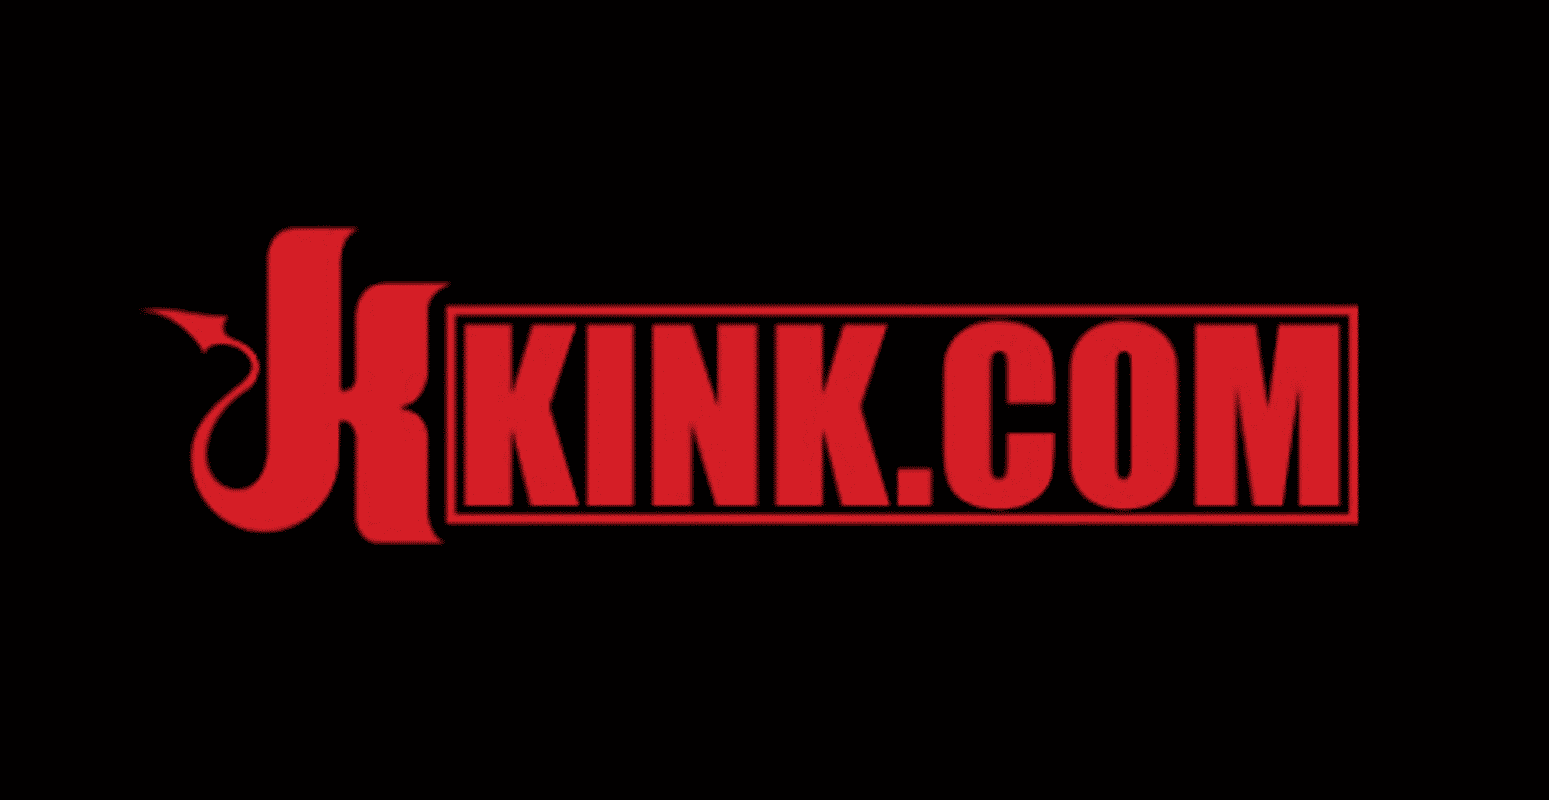 Kink.com is relaunching today with a new unified